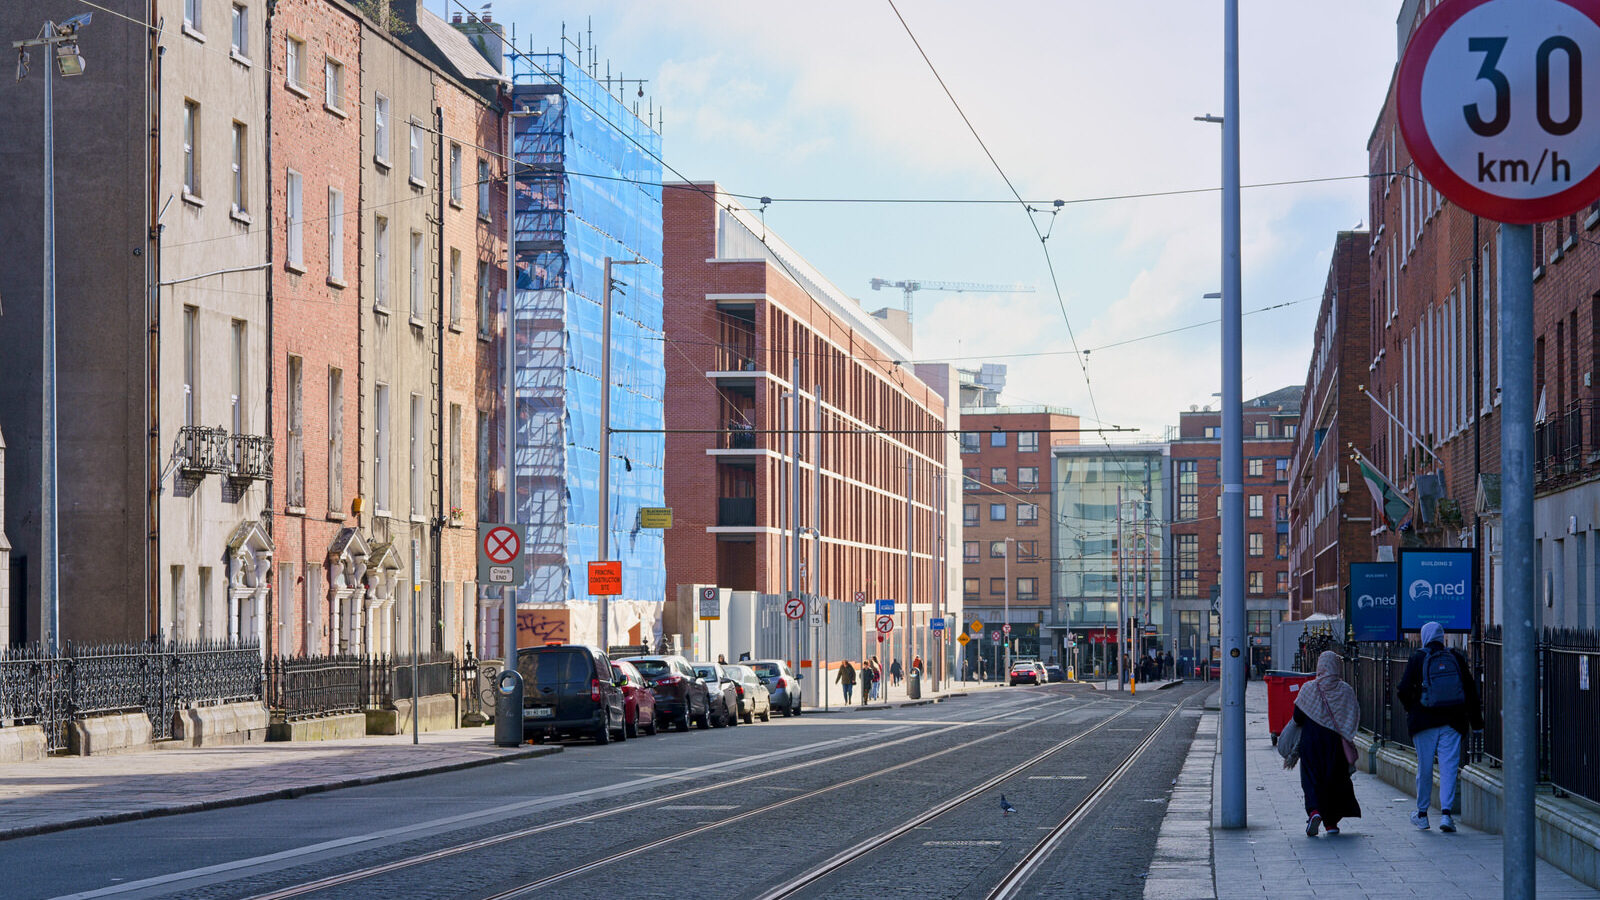 LUAS TRAM STOP AT LOWER DOMINICK STREET [AT THE MOMENT THE AREA DOES FEEL SAFER]-228667-1